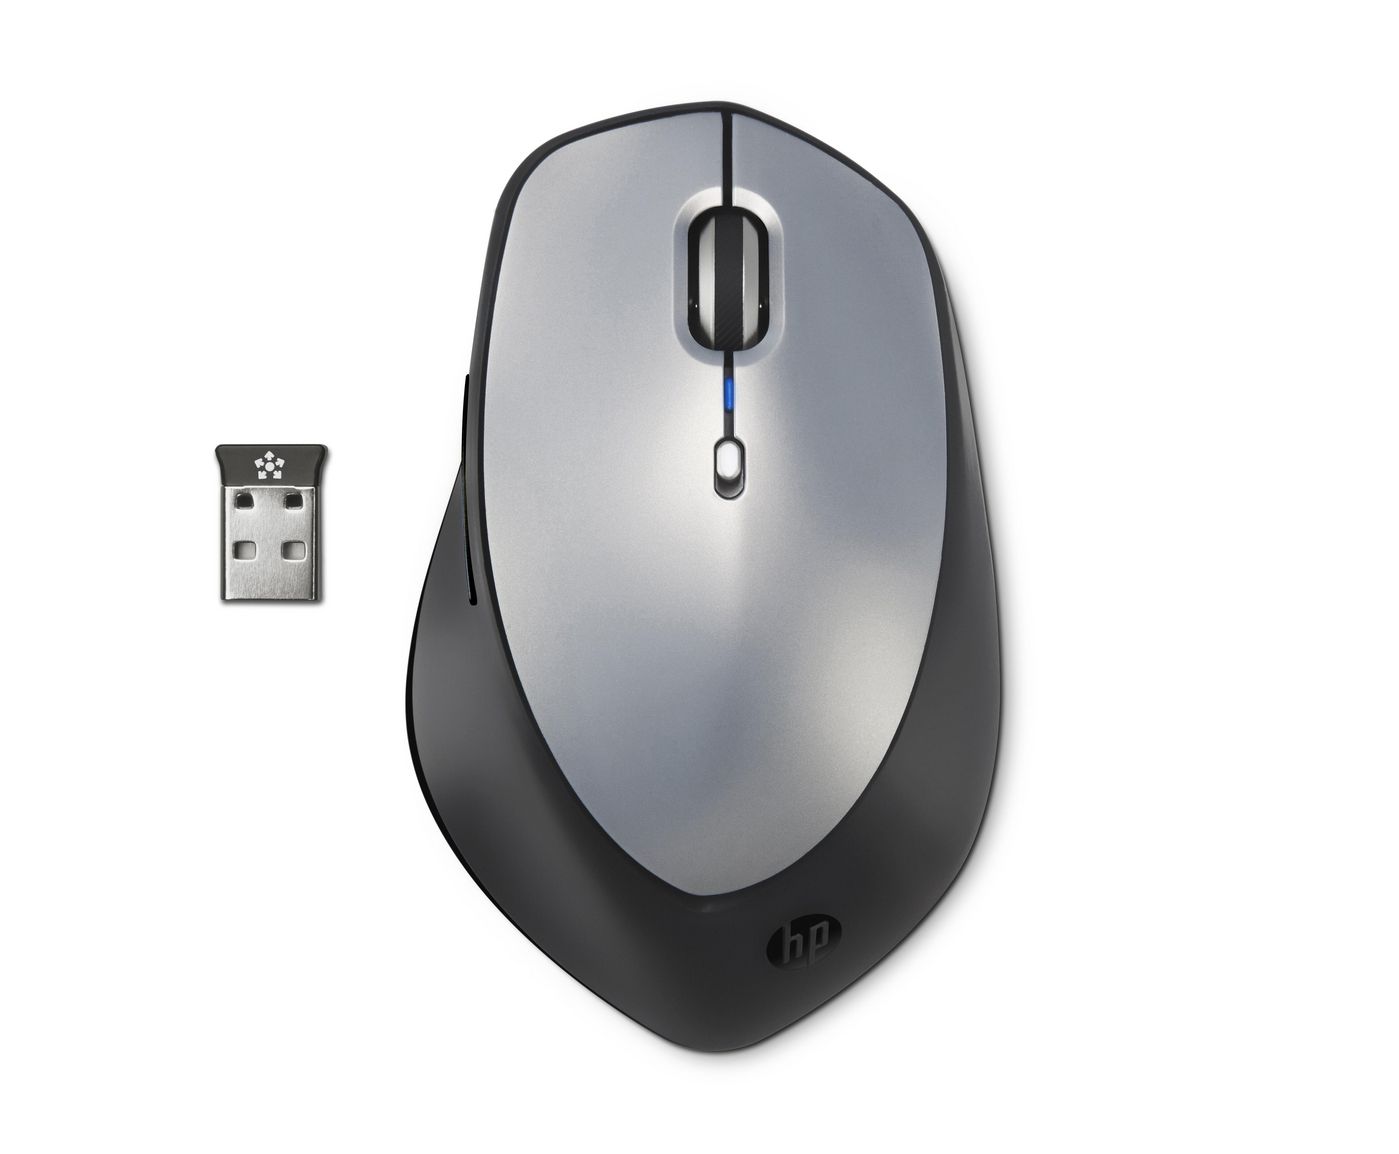 Wireless Mouse X5500